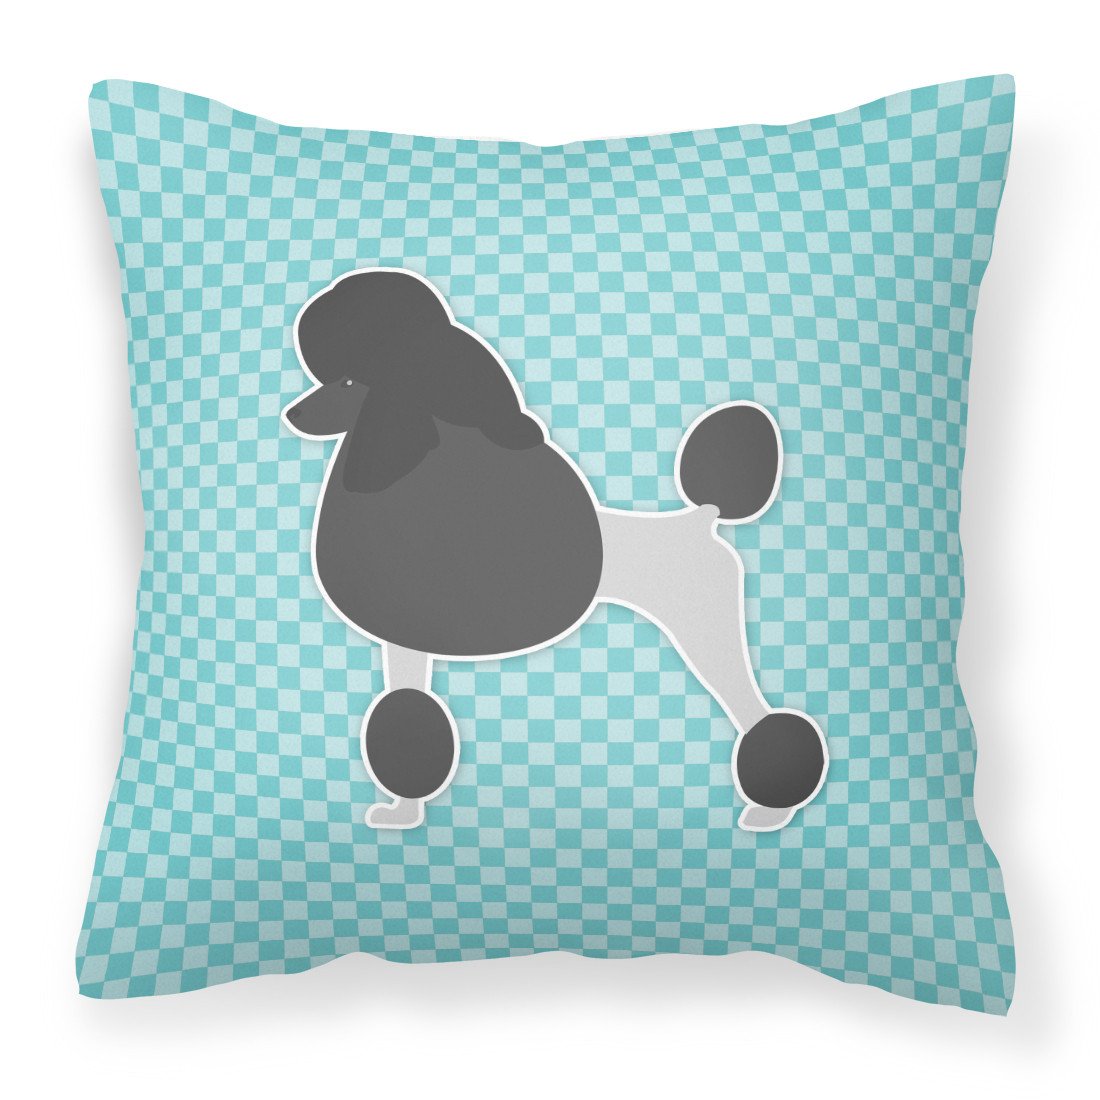 Poodle Checkerboard Blue Fabric Decorative Pillow BB3739PW1818 by Caroline's Treasures